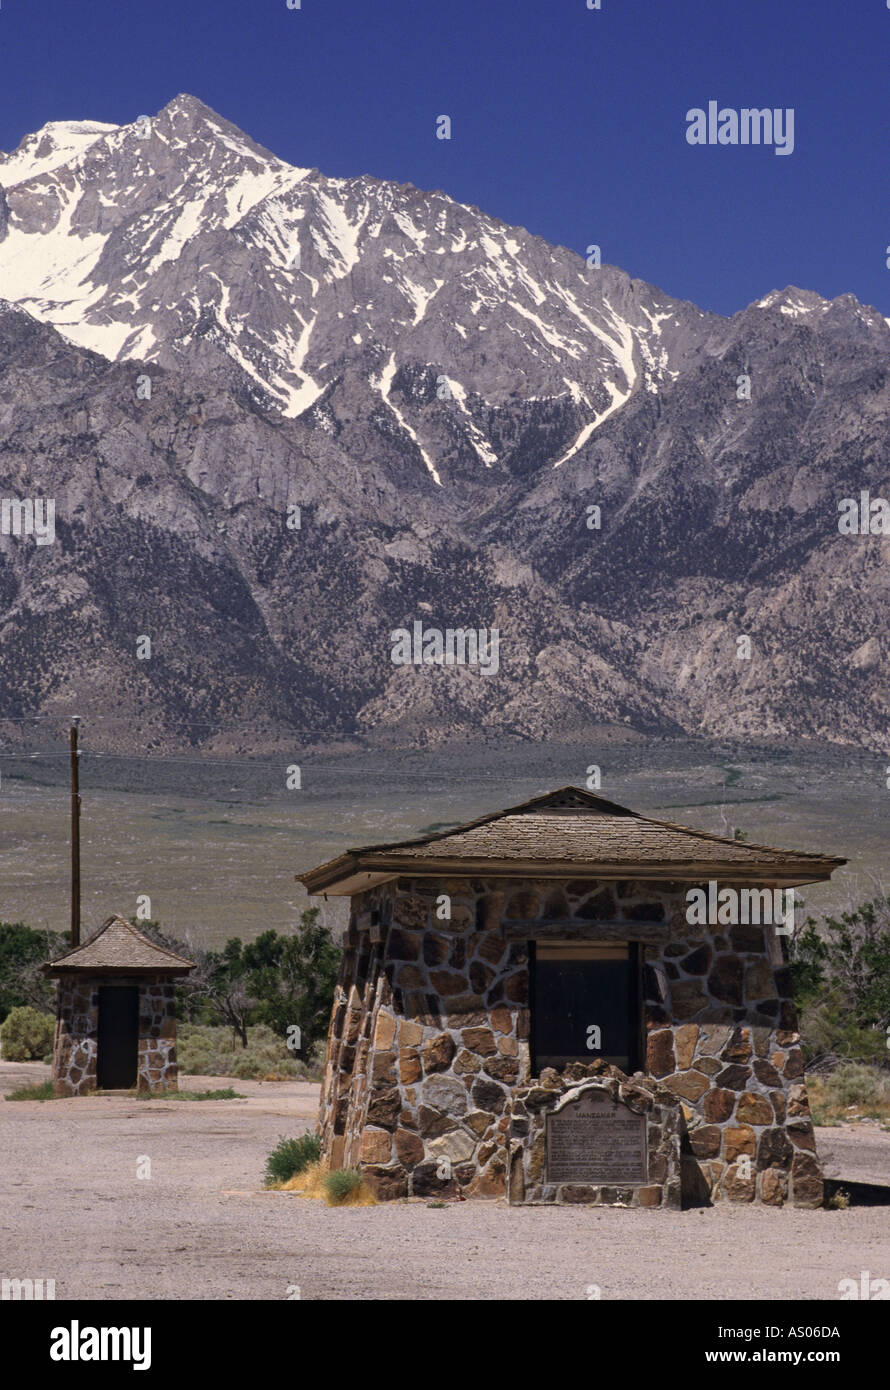 California Owens Valley Manzanar World War Two Japanese American internment camp remains of front gate pagoda Stock Photo